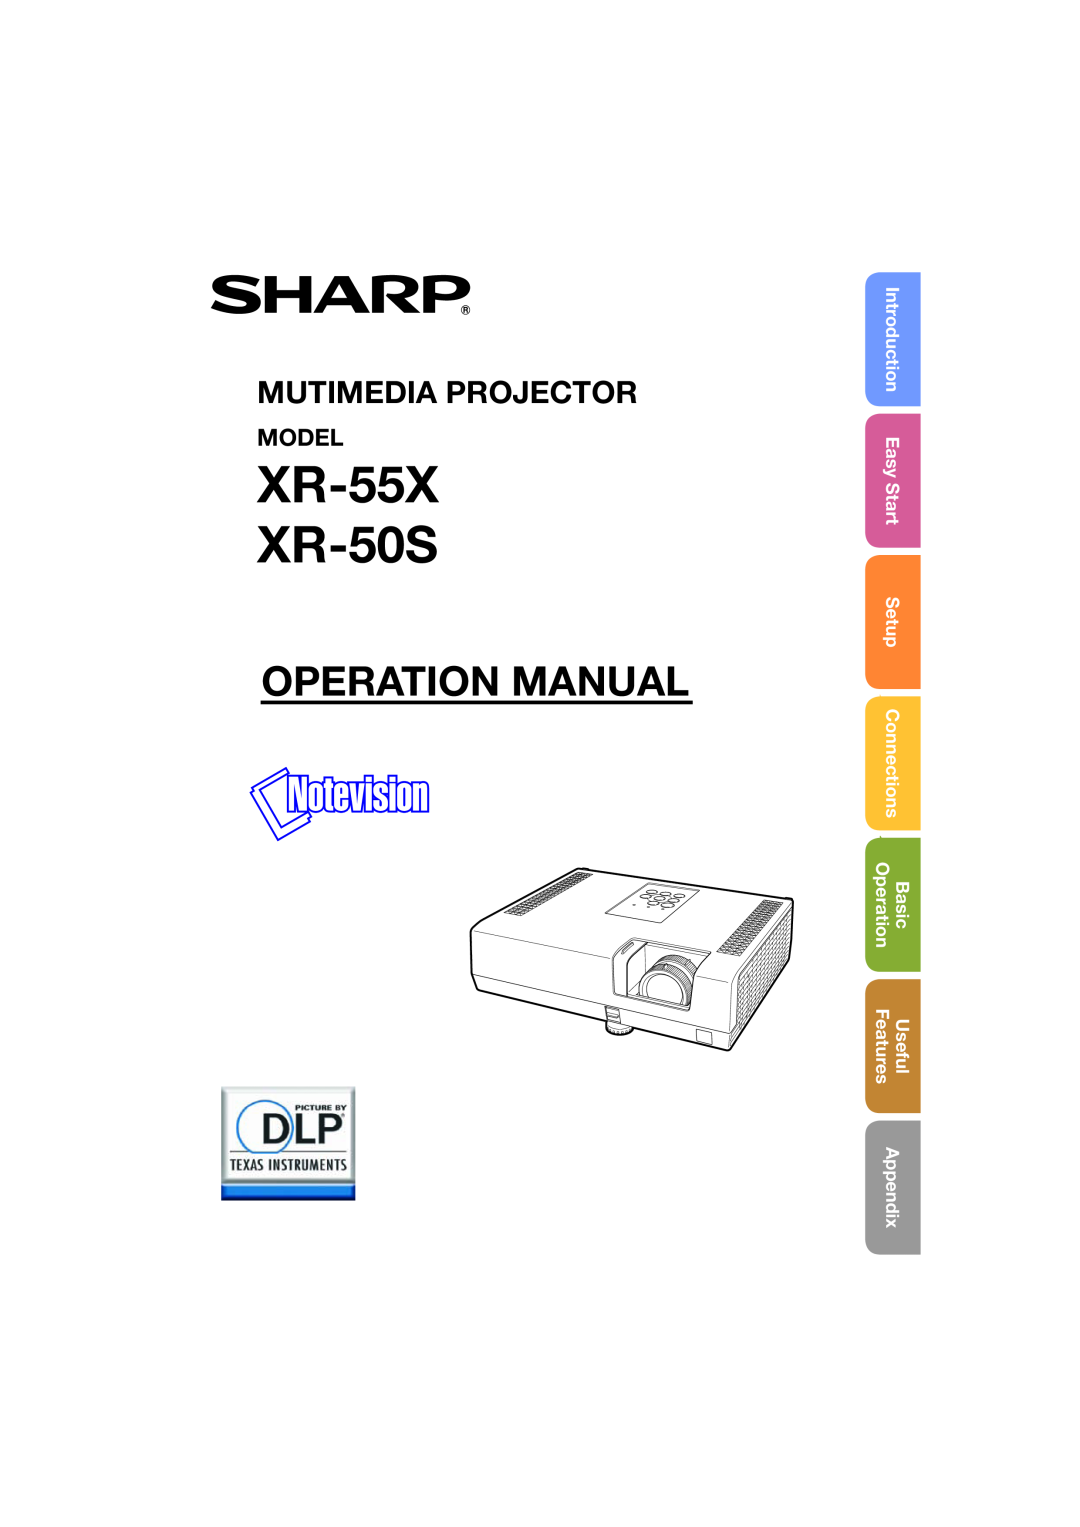 Sharp XR-50S appendix Introduction, Easy Start, Connections, Operation, Basic, Features, Useful, Appendix, Setup, Model 